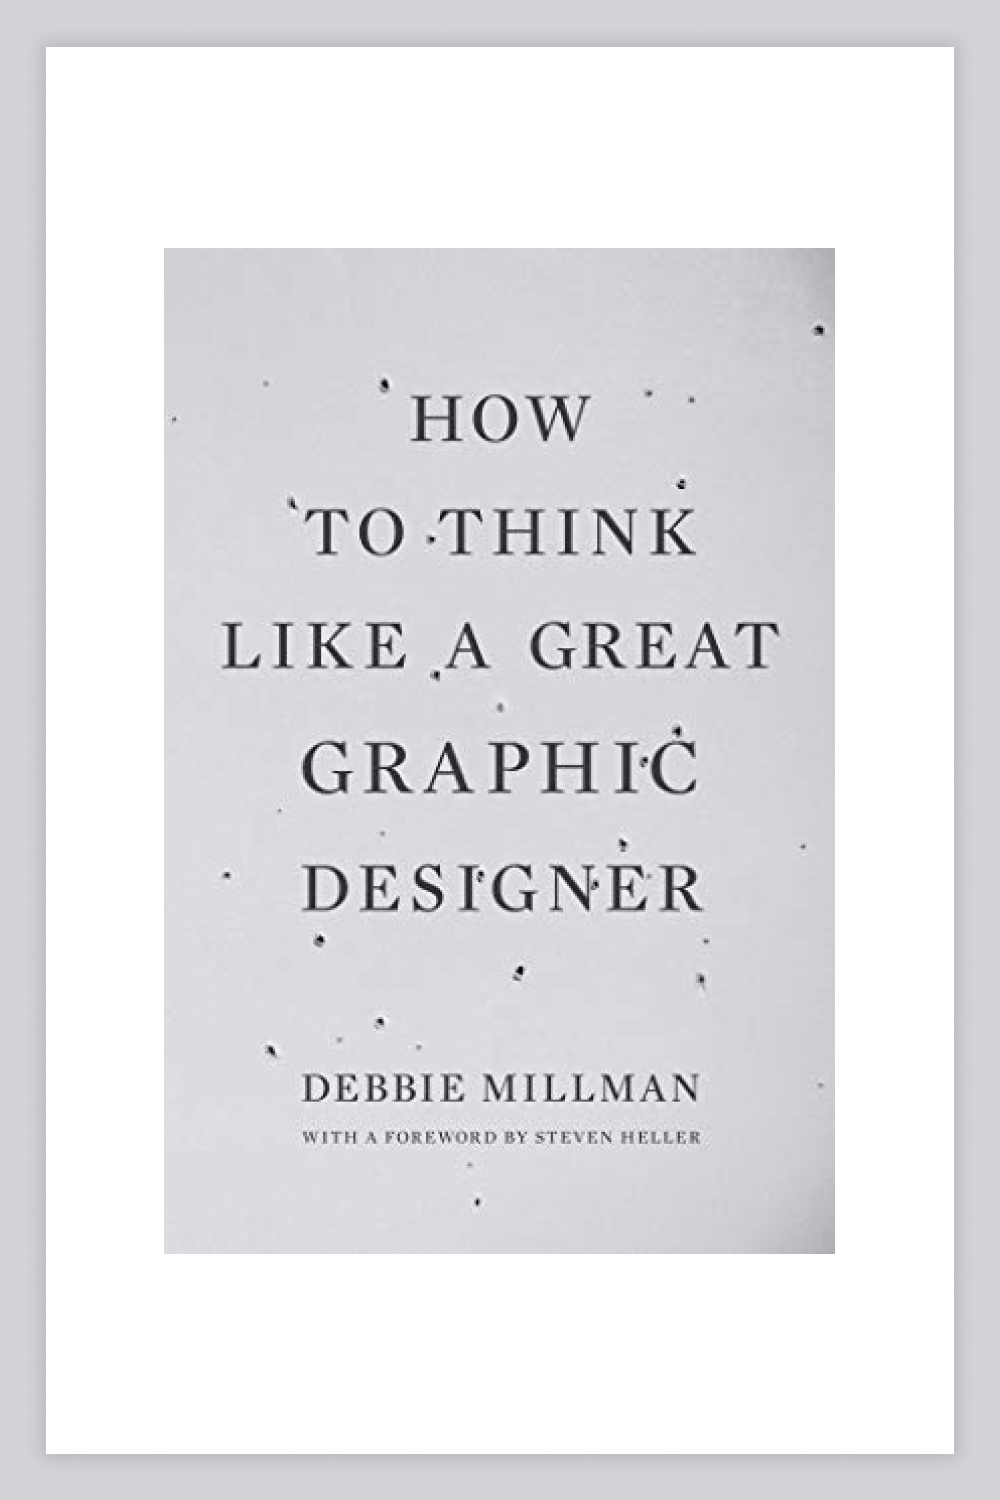 A book How to Think Like a Great Graphic Designer.